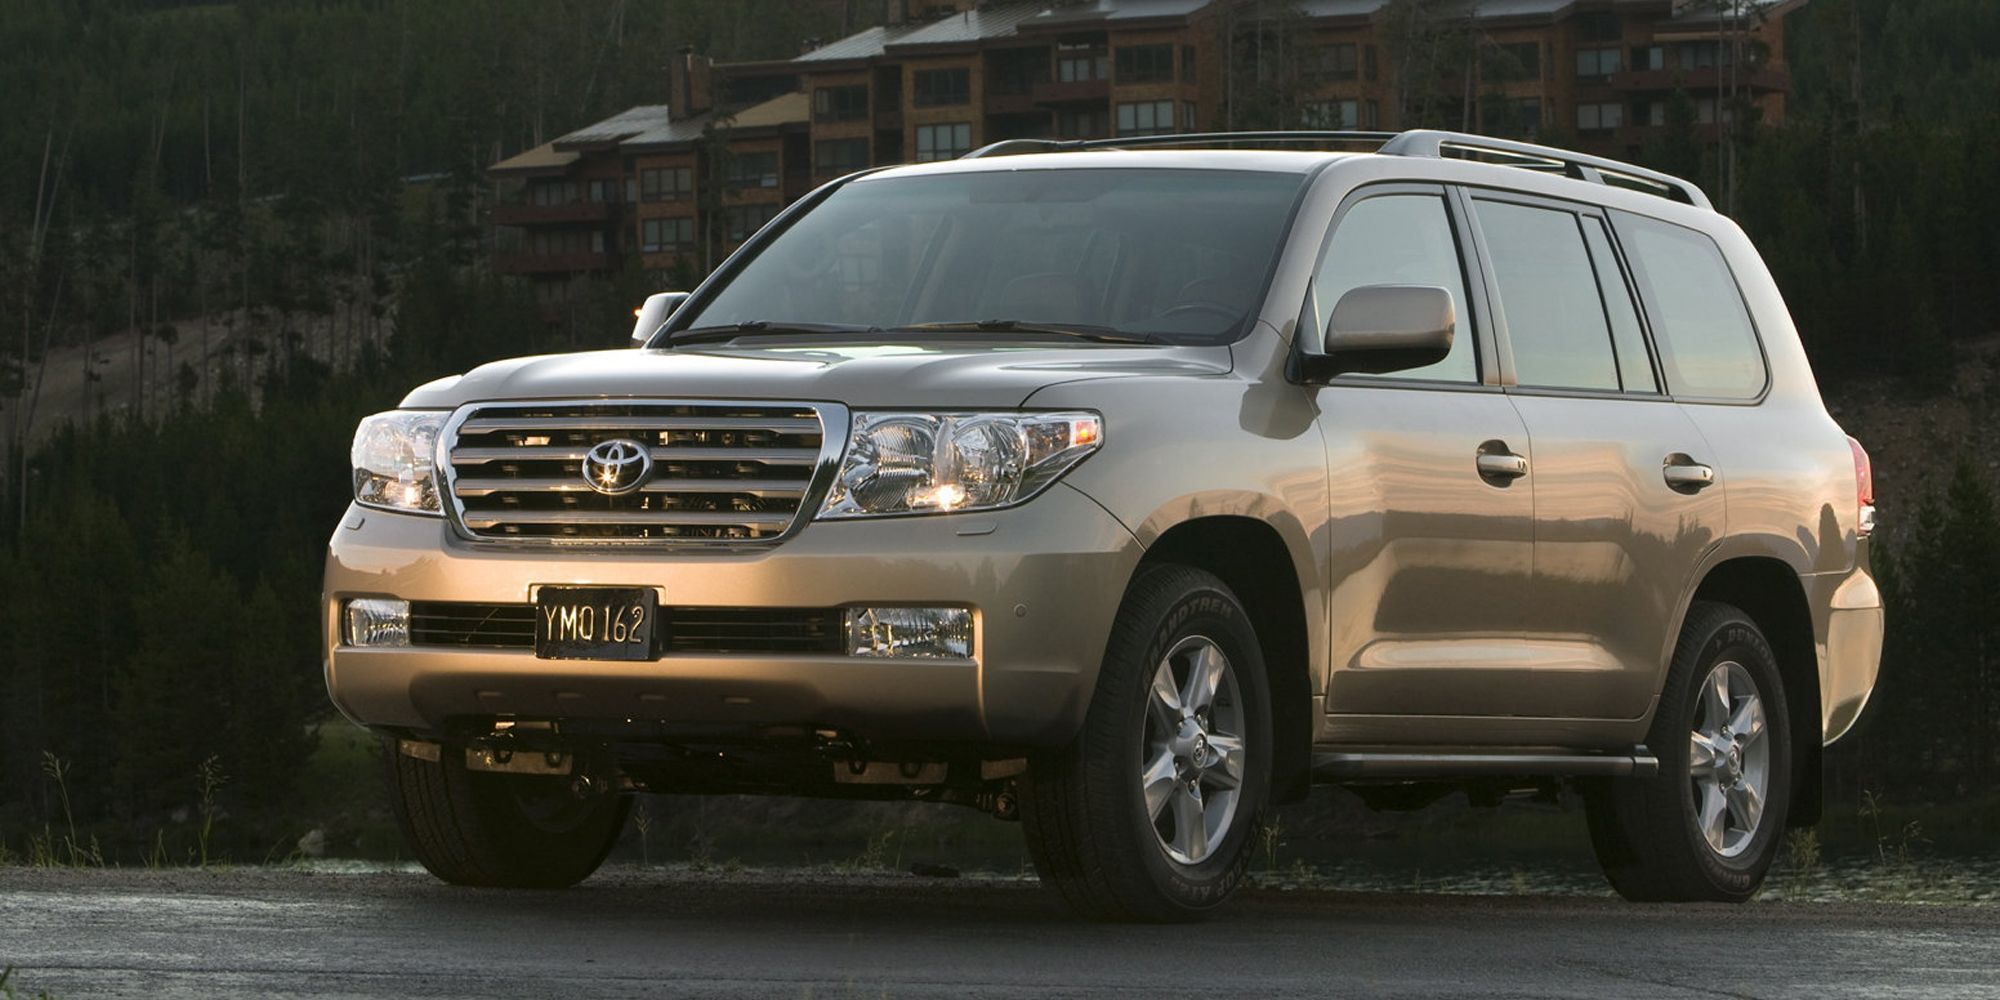 The front of the pre-facelift Land Cruiser